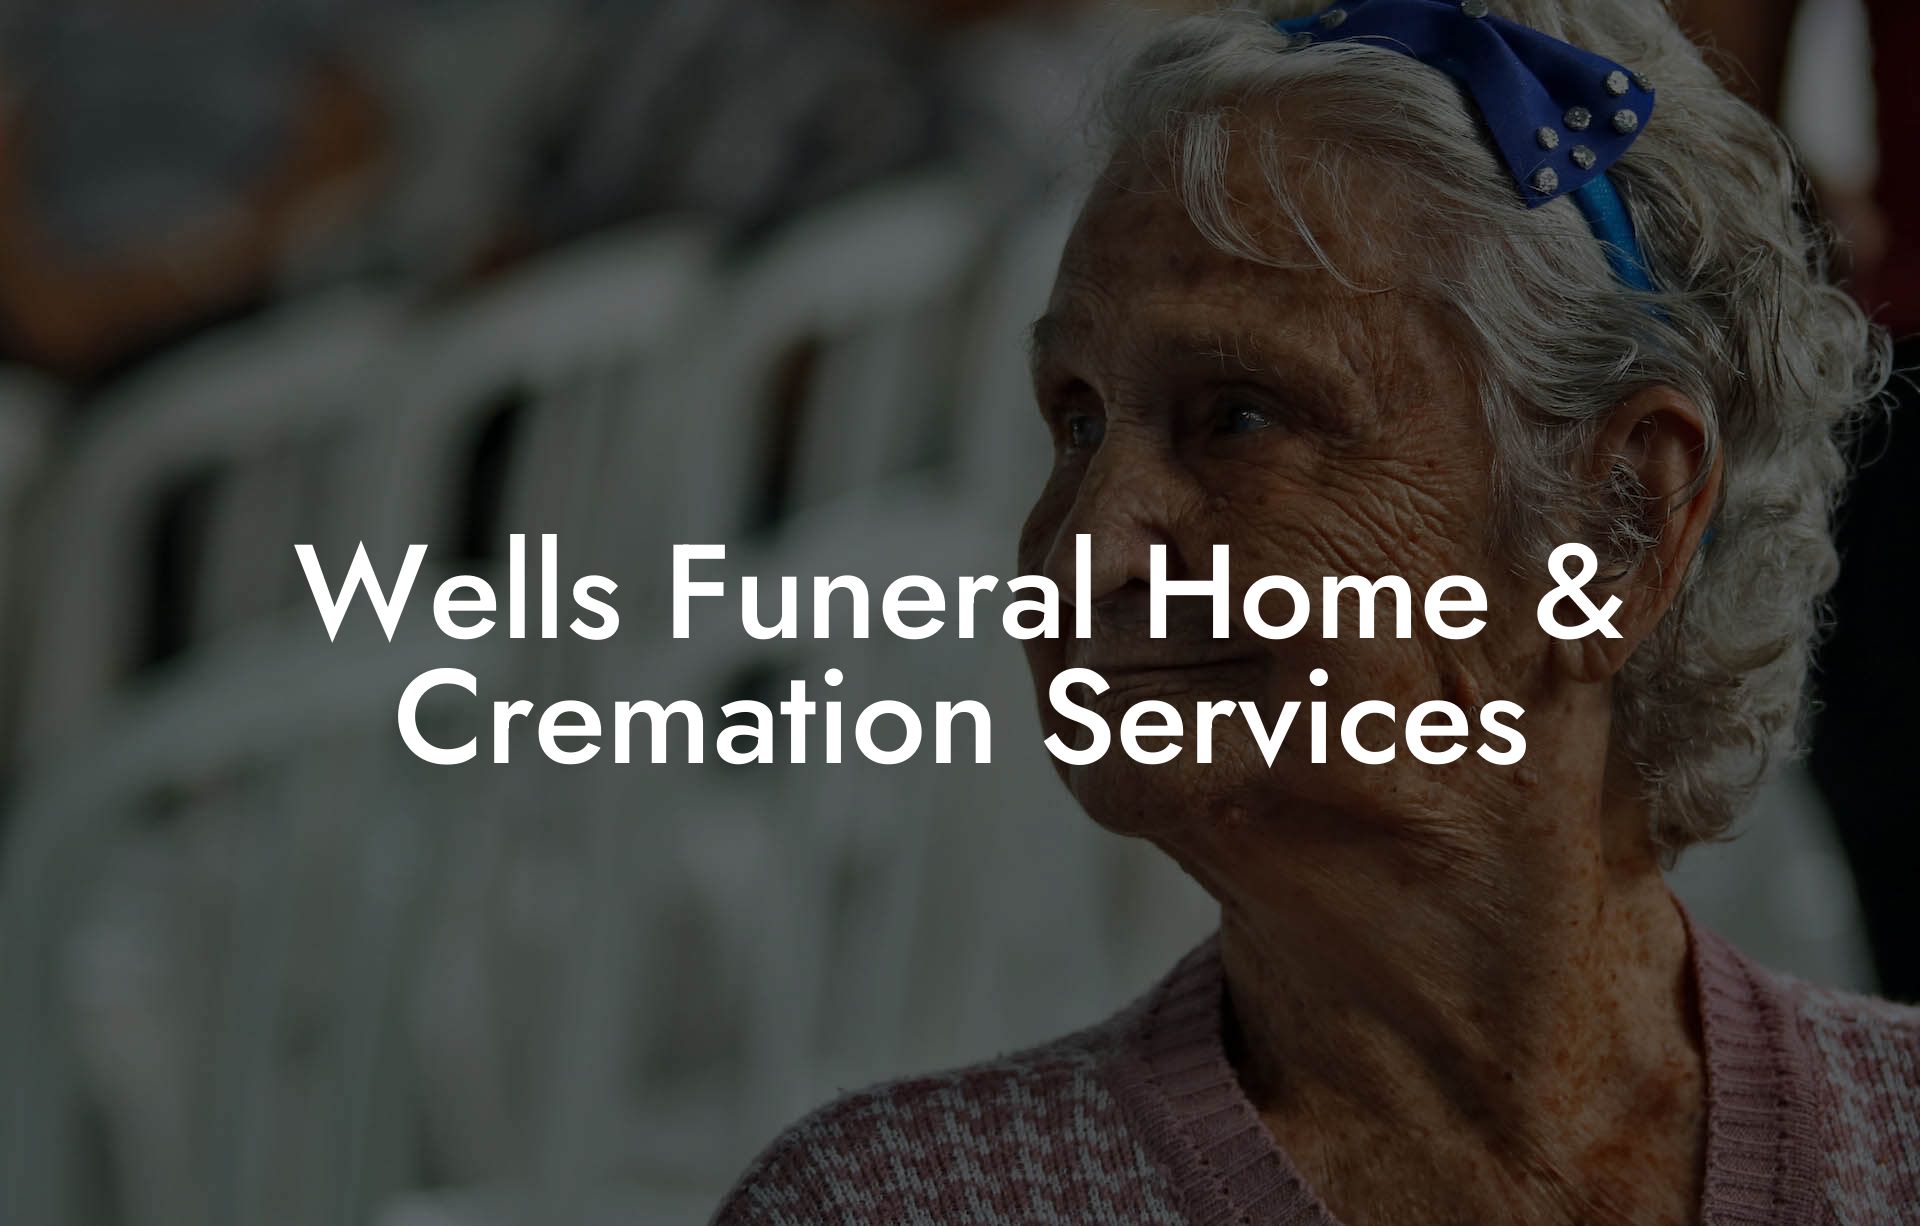 Wells Funeral Home & Cremation Services